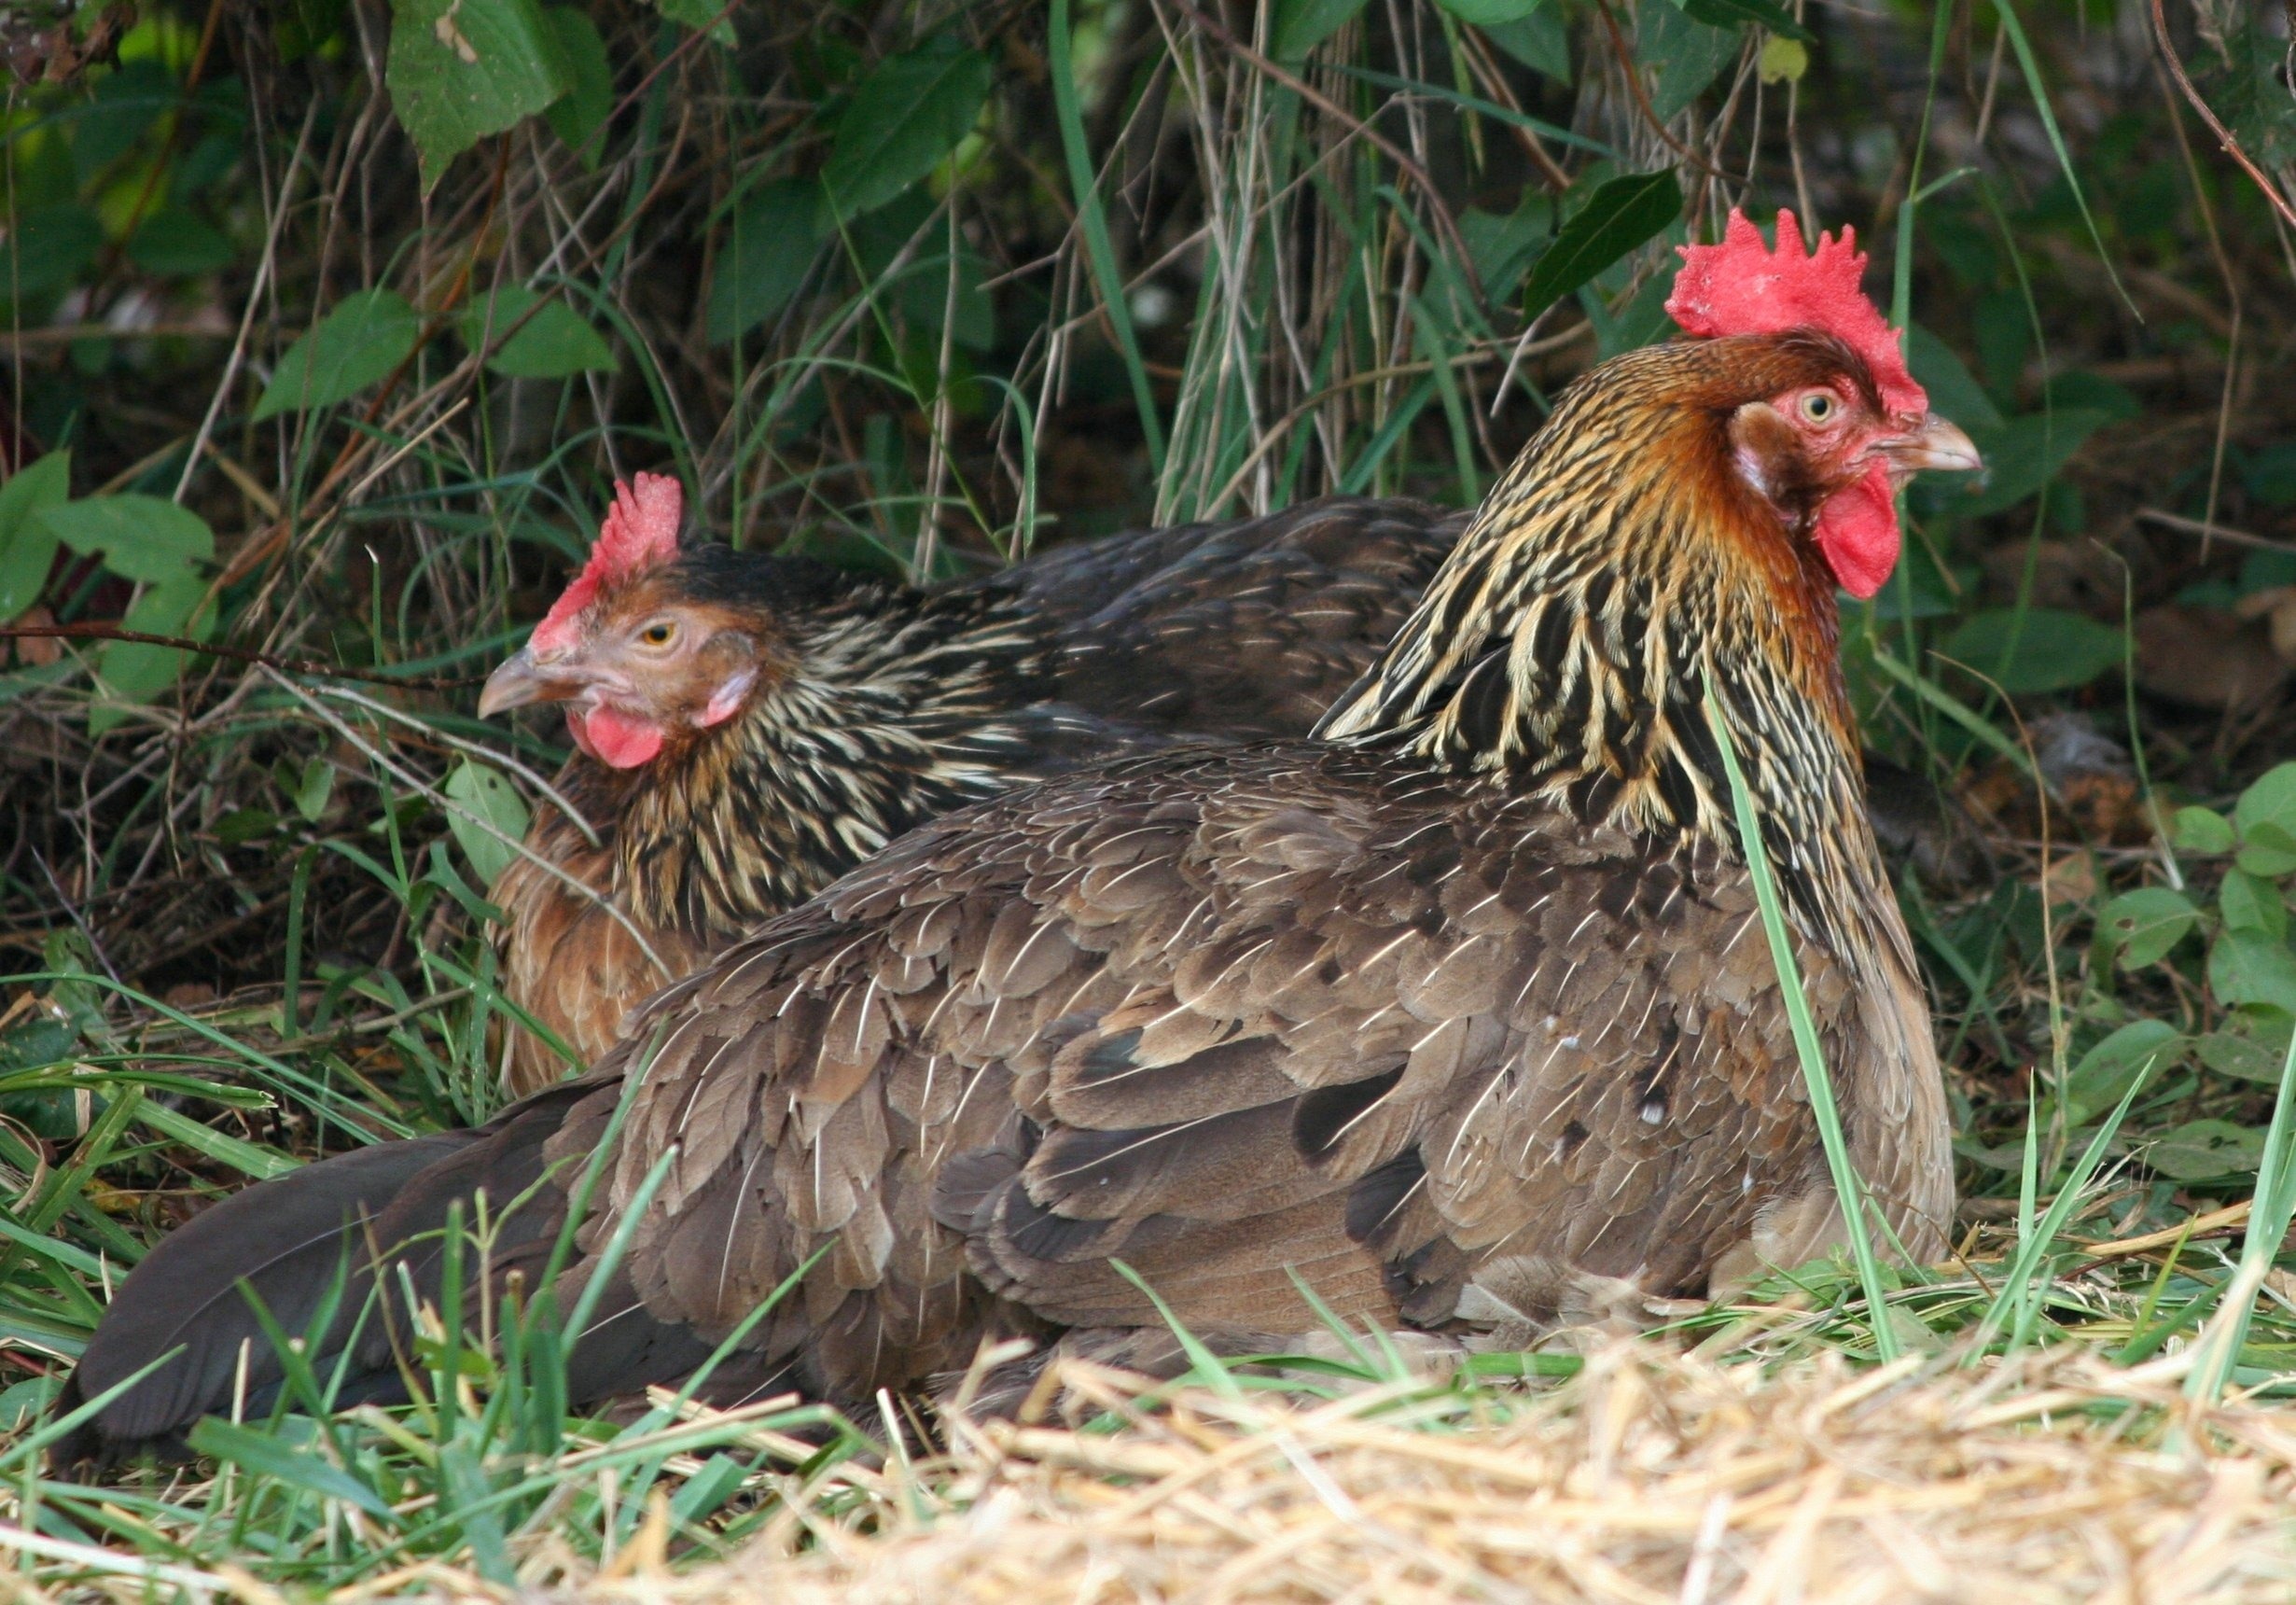 two brown hens